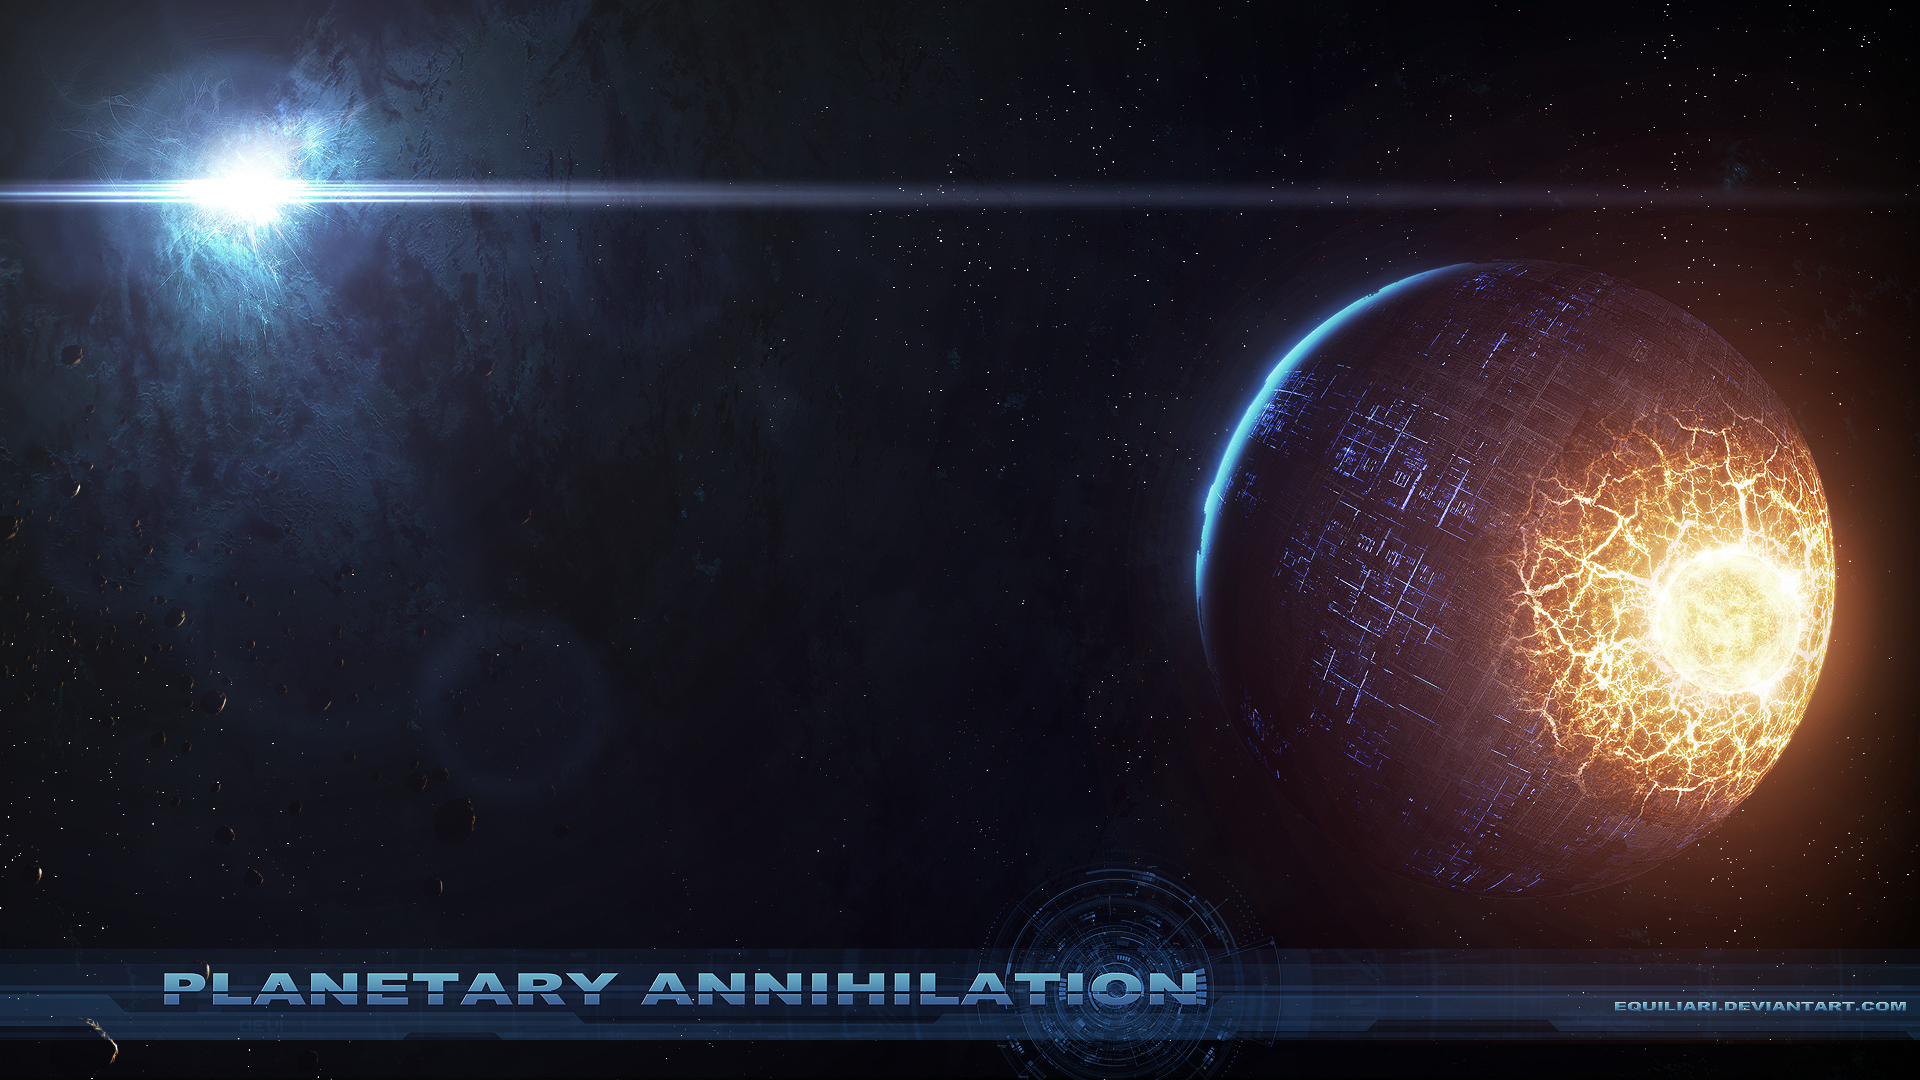 Plaary Annihilation By Equiliari